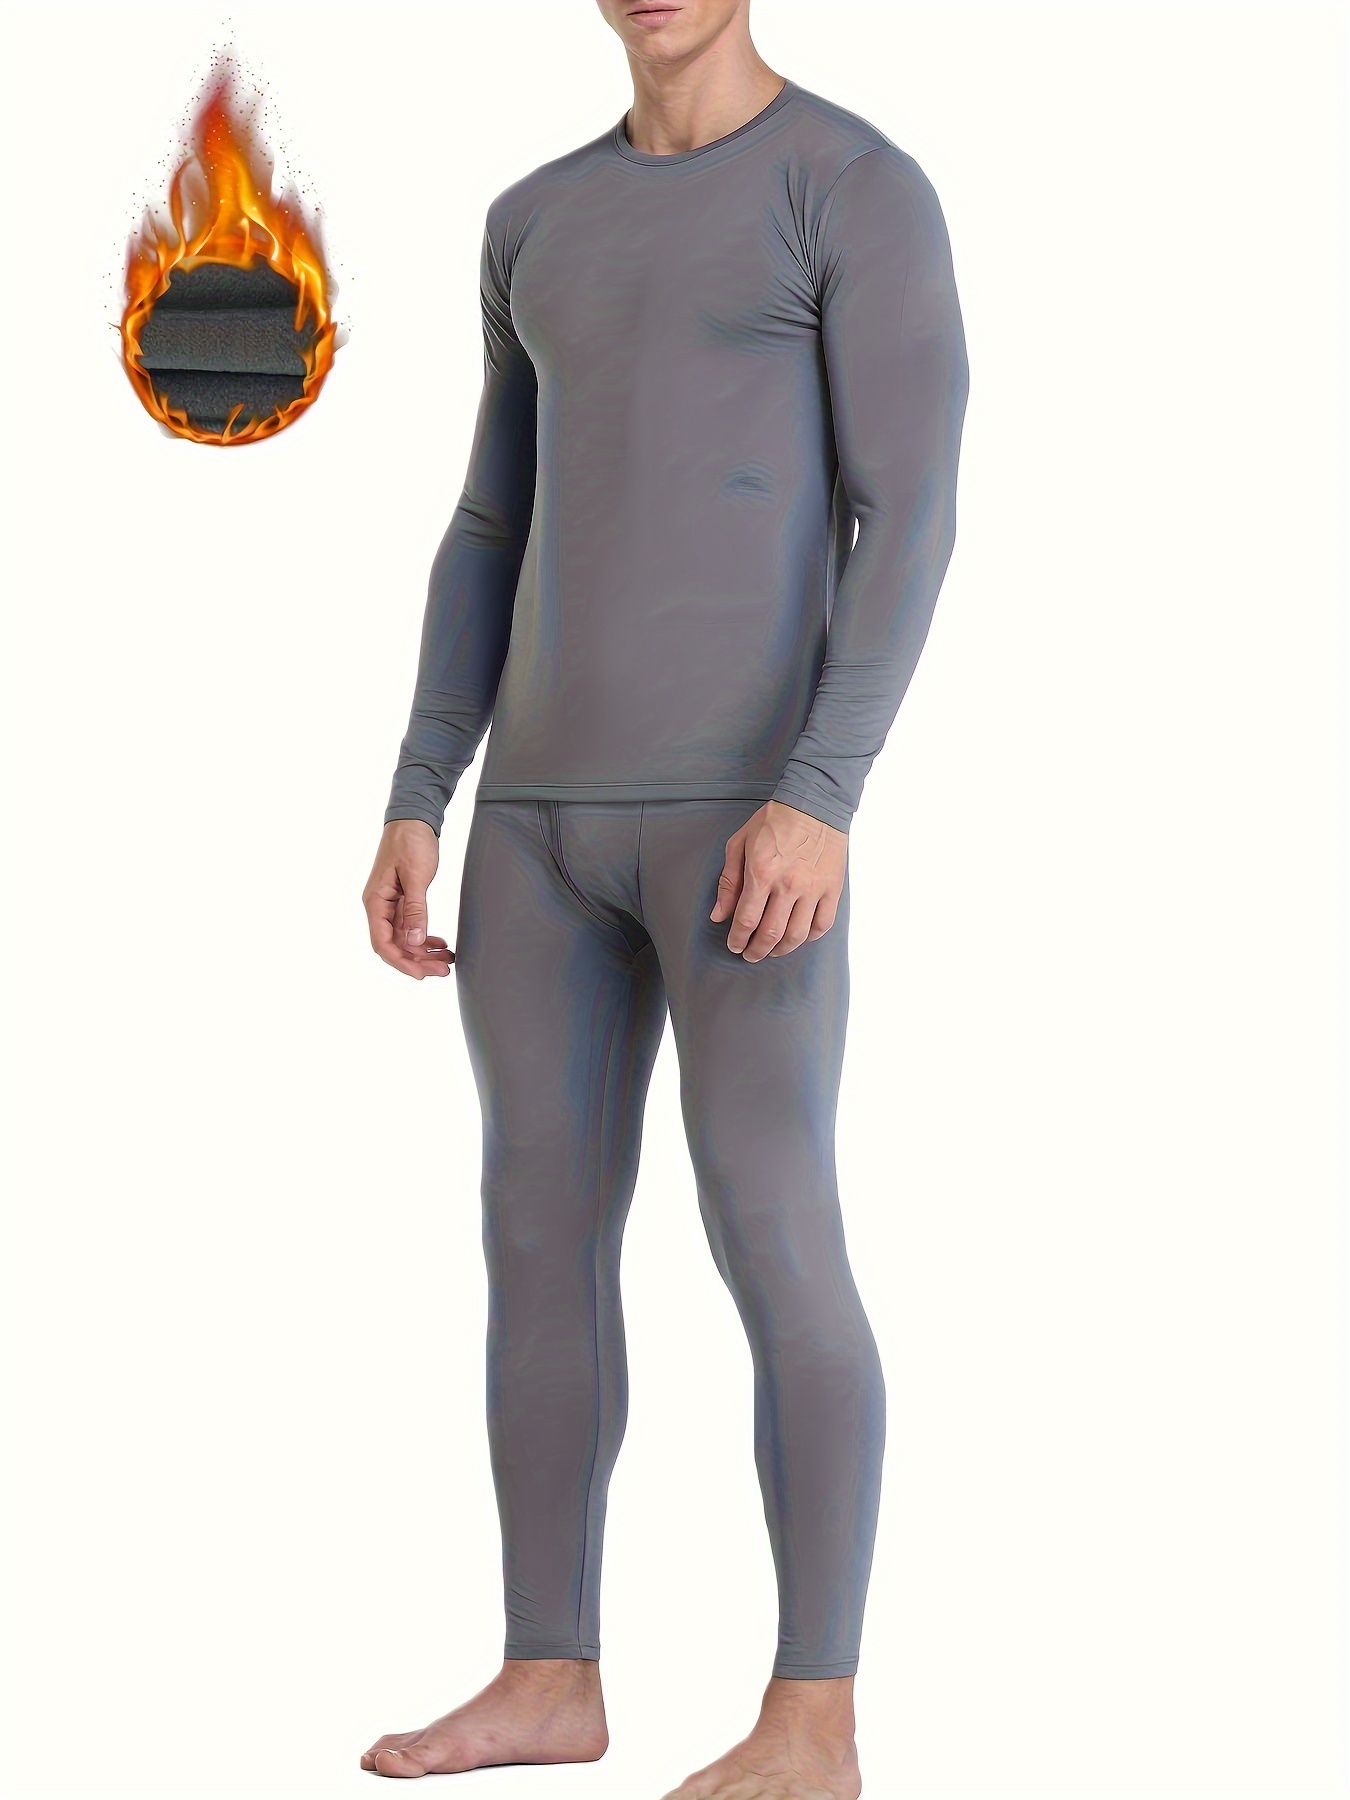 LSOLMD Religious Gifts for Men, Mens Thermal Underwear Casual